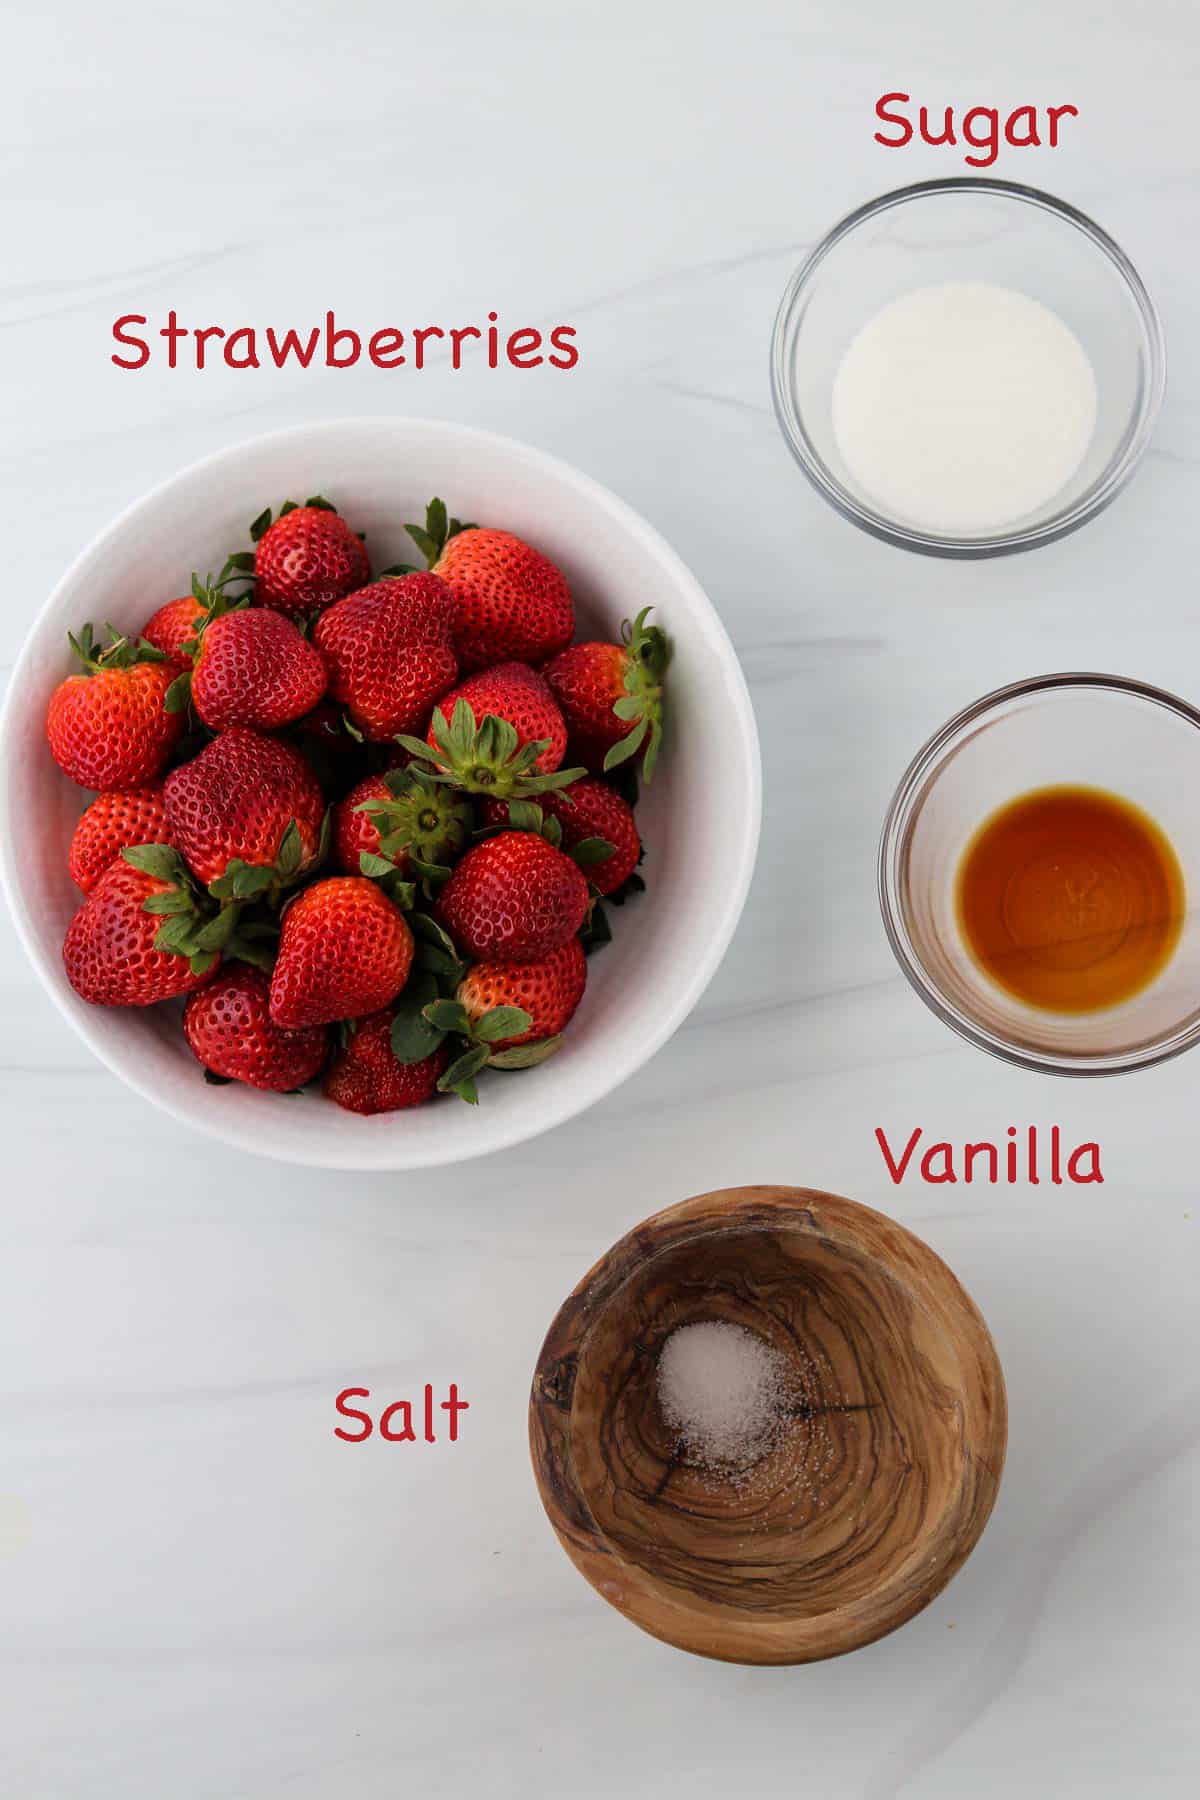 Labeled ingredients for Simple and Sweet Roasted Strawberries.